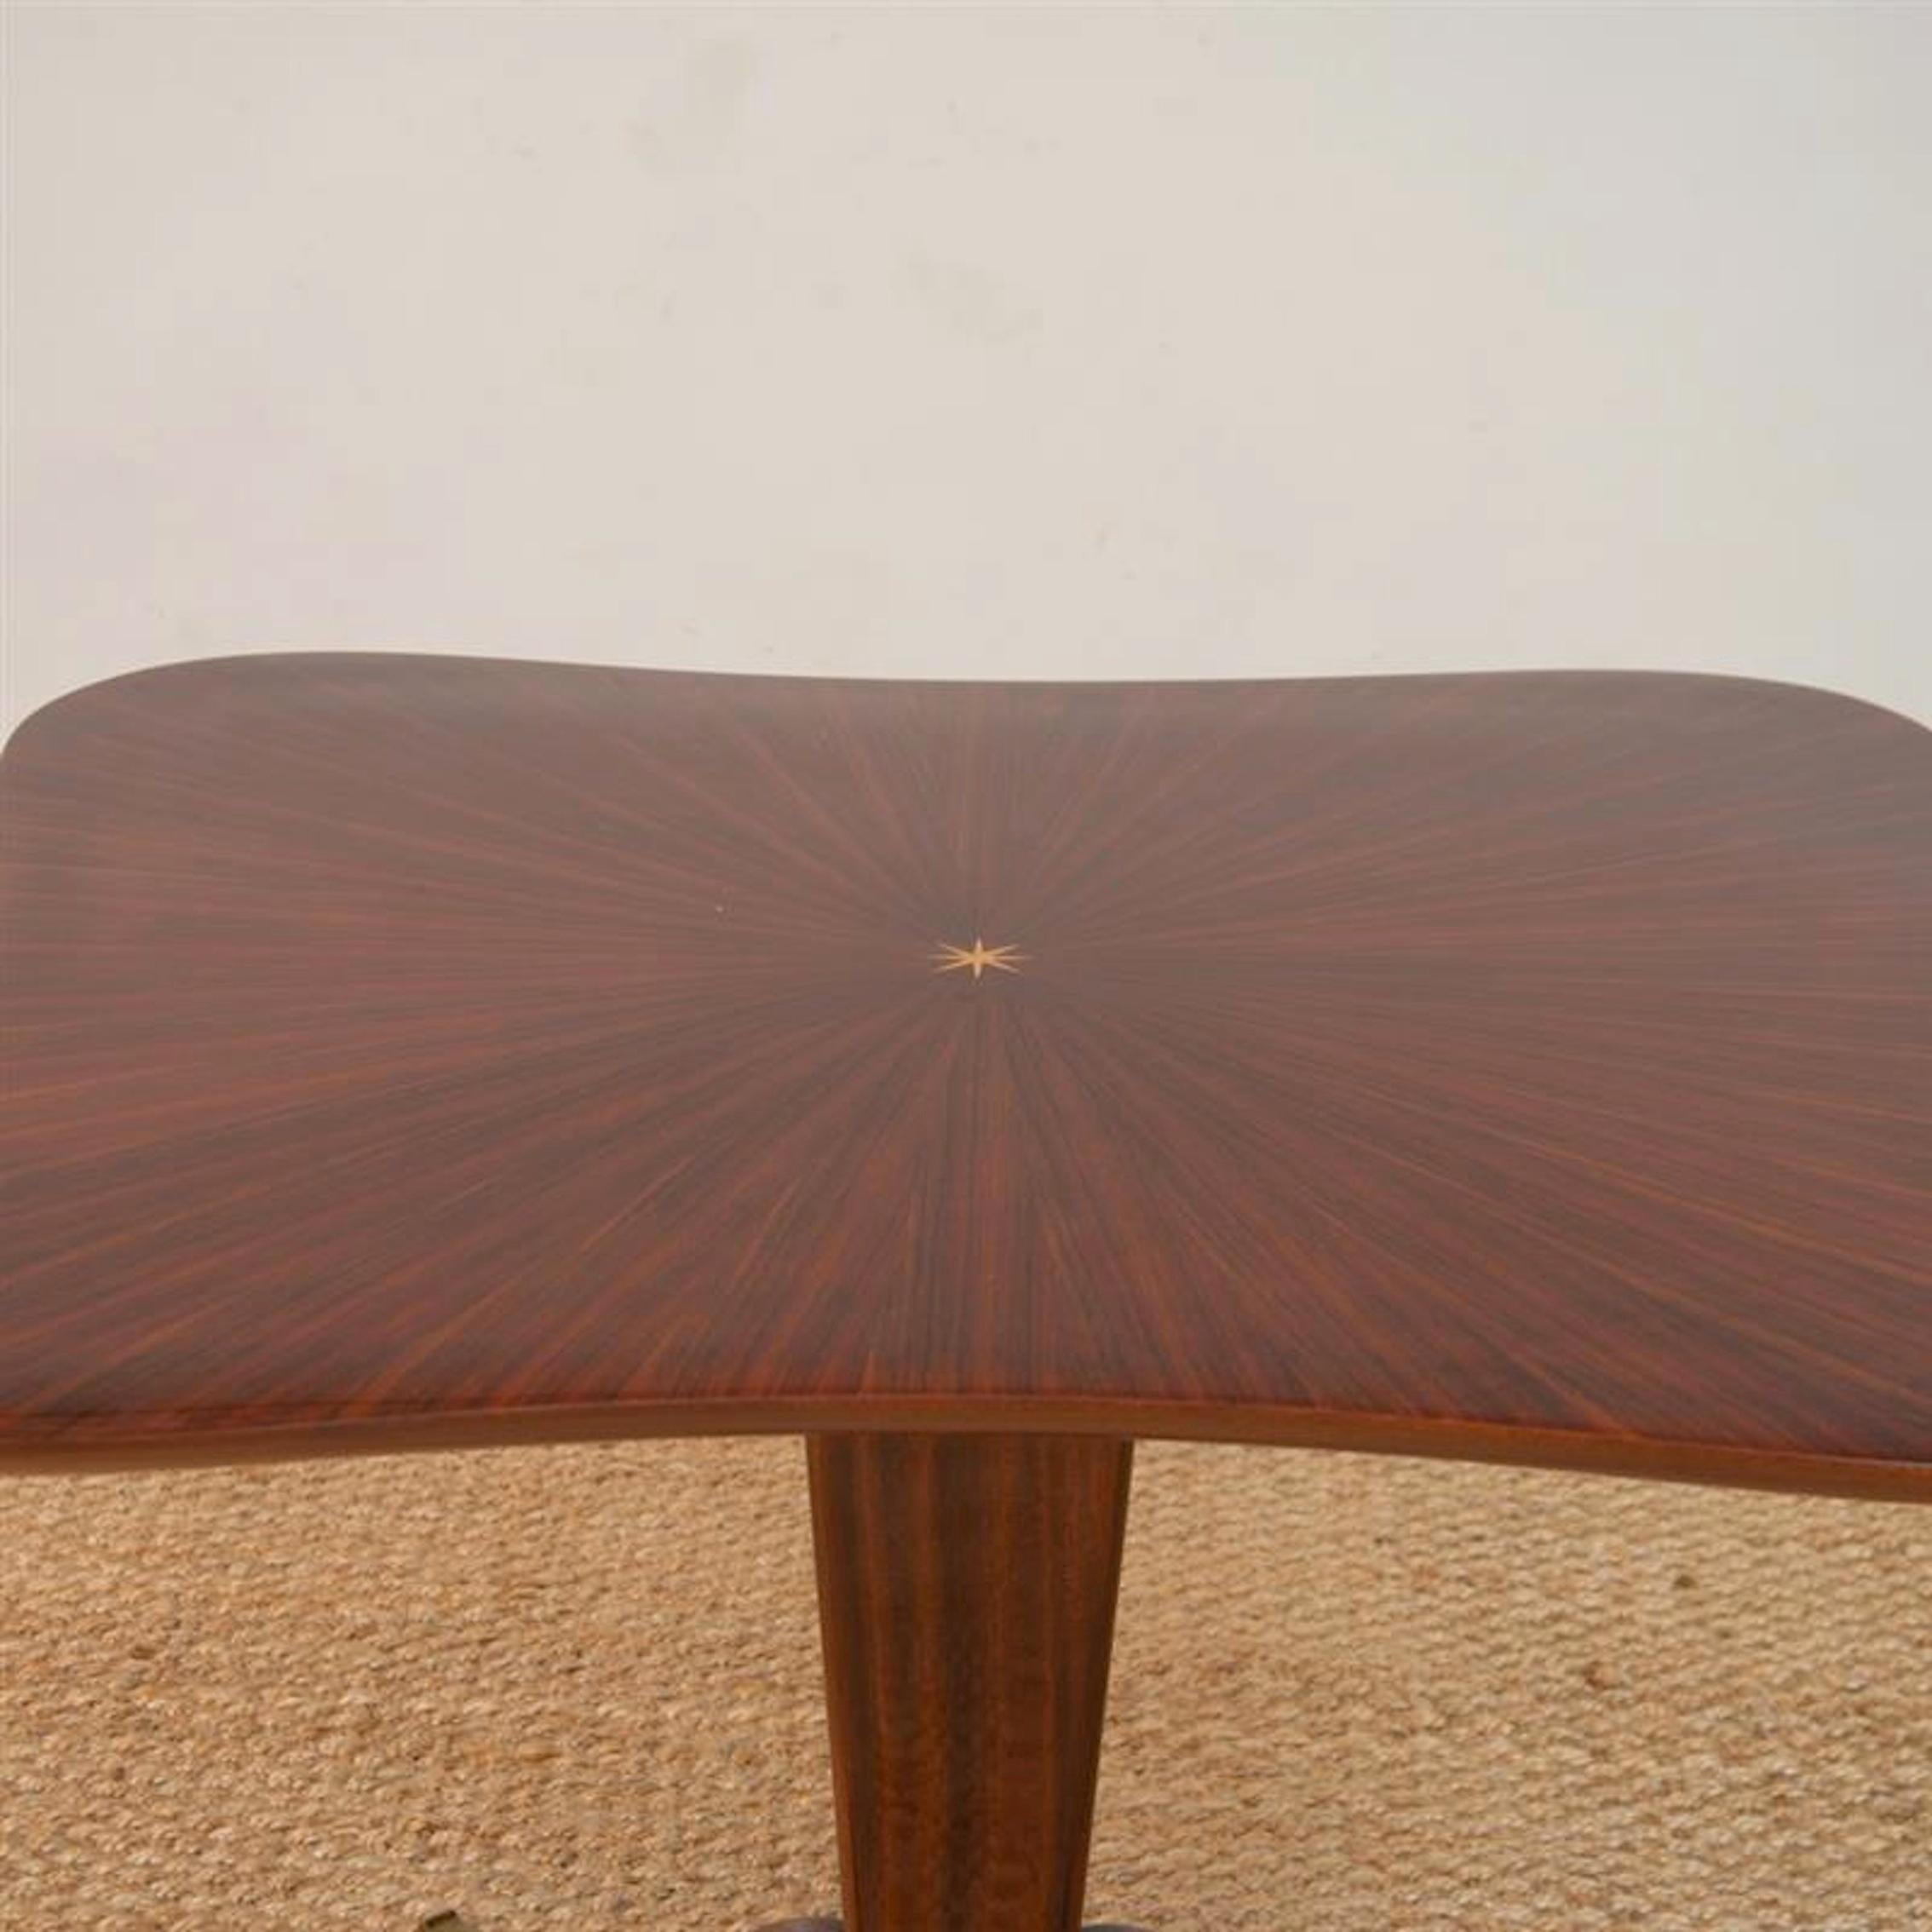 Fine mahogany and rosewood table by Paolo Buffa
Also available to match with this table is a set of 4 rosewood and mahogany dining chairs also by Paolo Buffa
Can be seen Found in R. Rizzi, I mobili di Paolo Buffa, Cesena 2001.